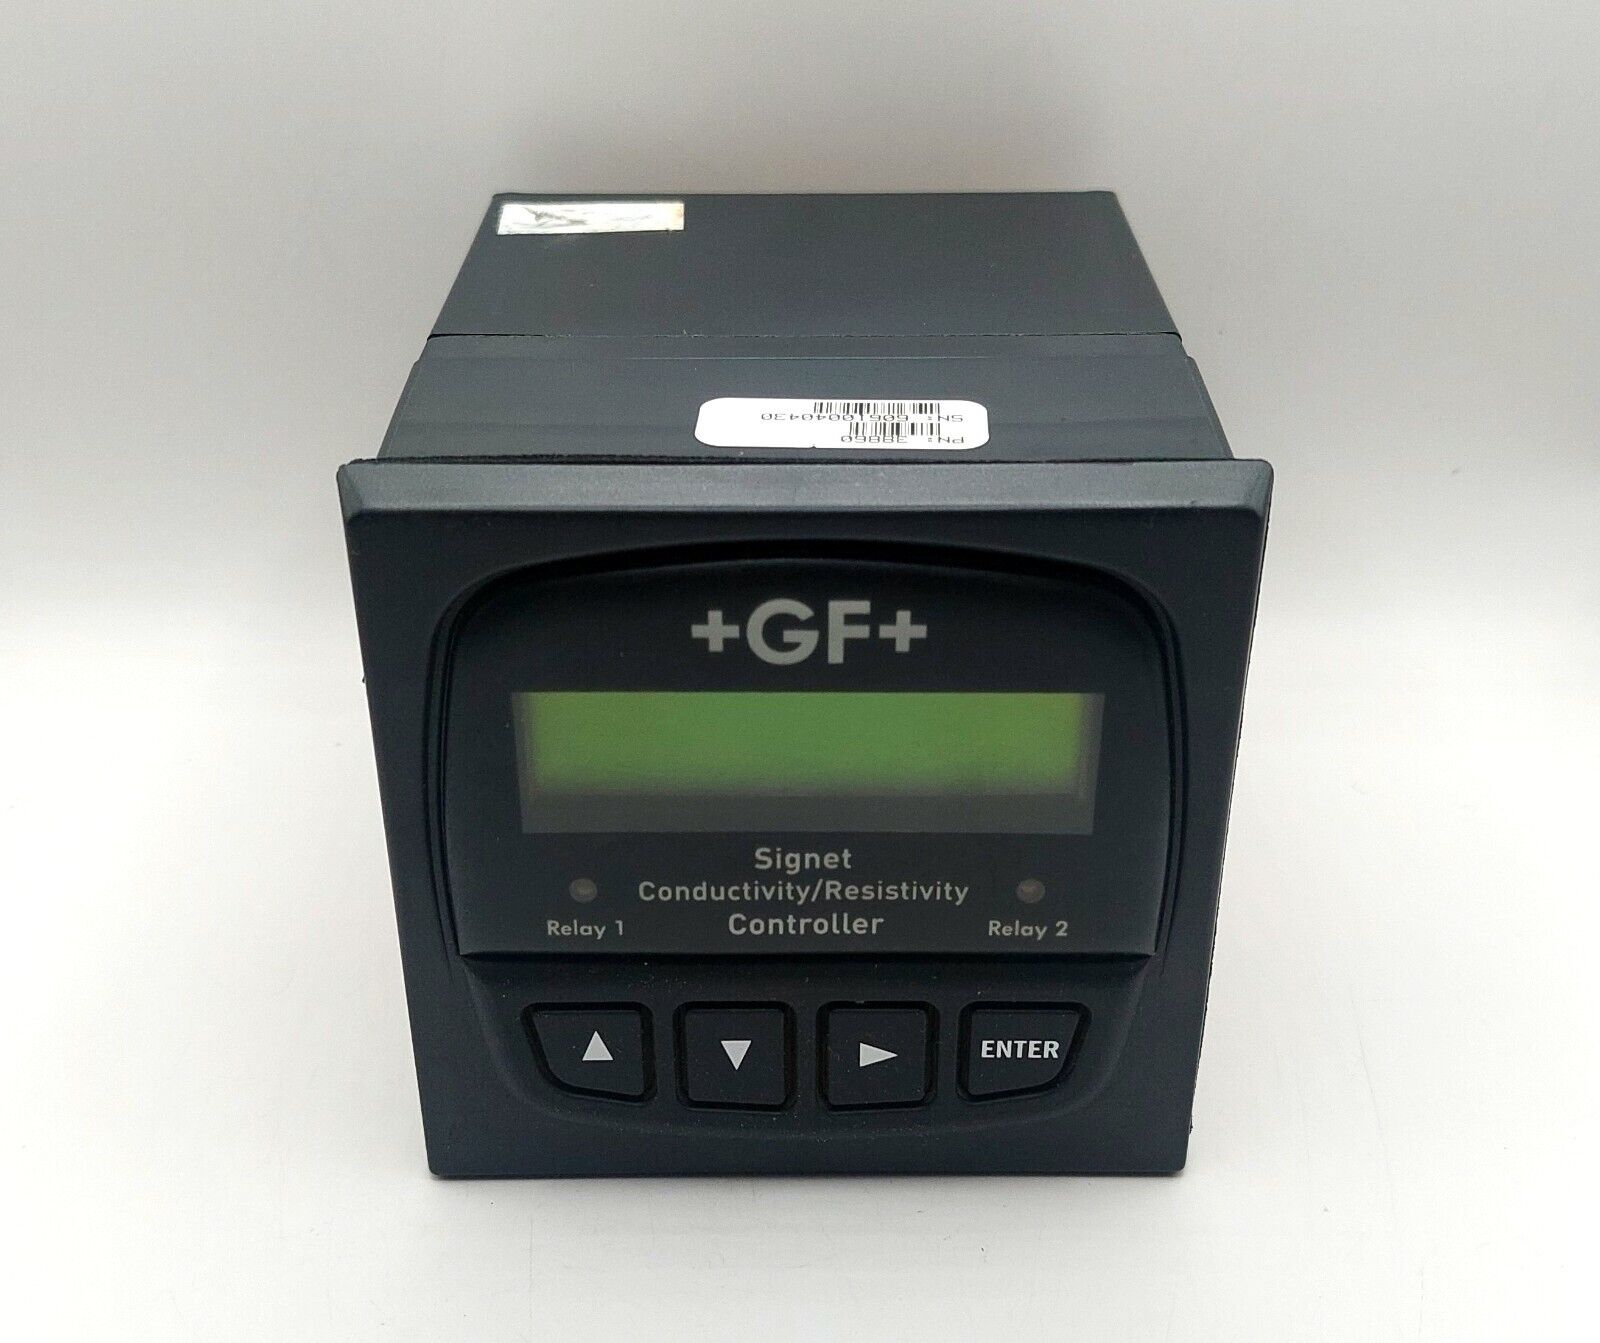 GEORG FISCHER SIGNET 3-8860 Two-Channel Conductivity Controller